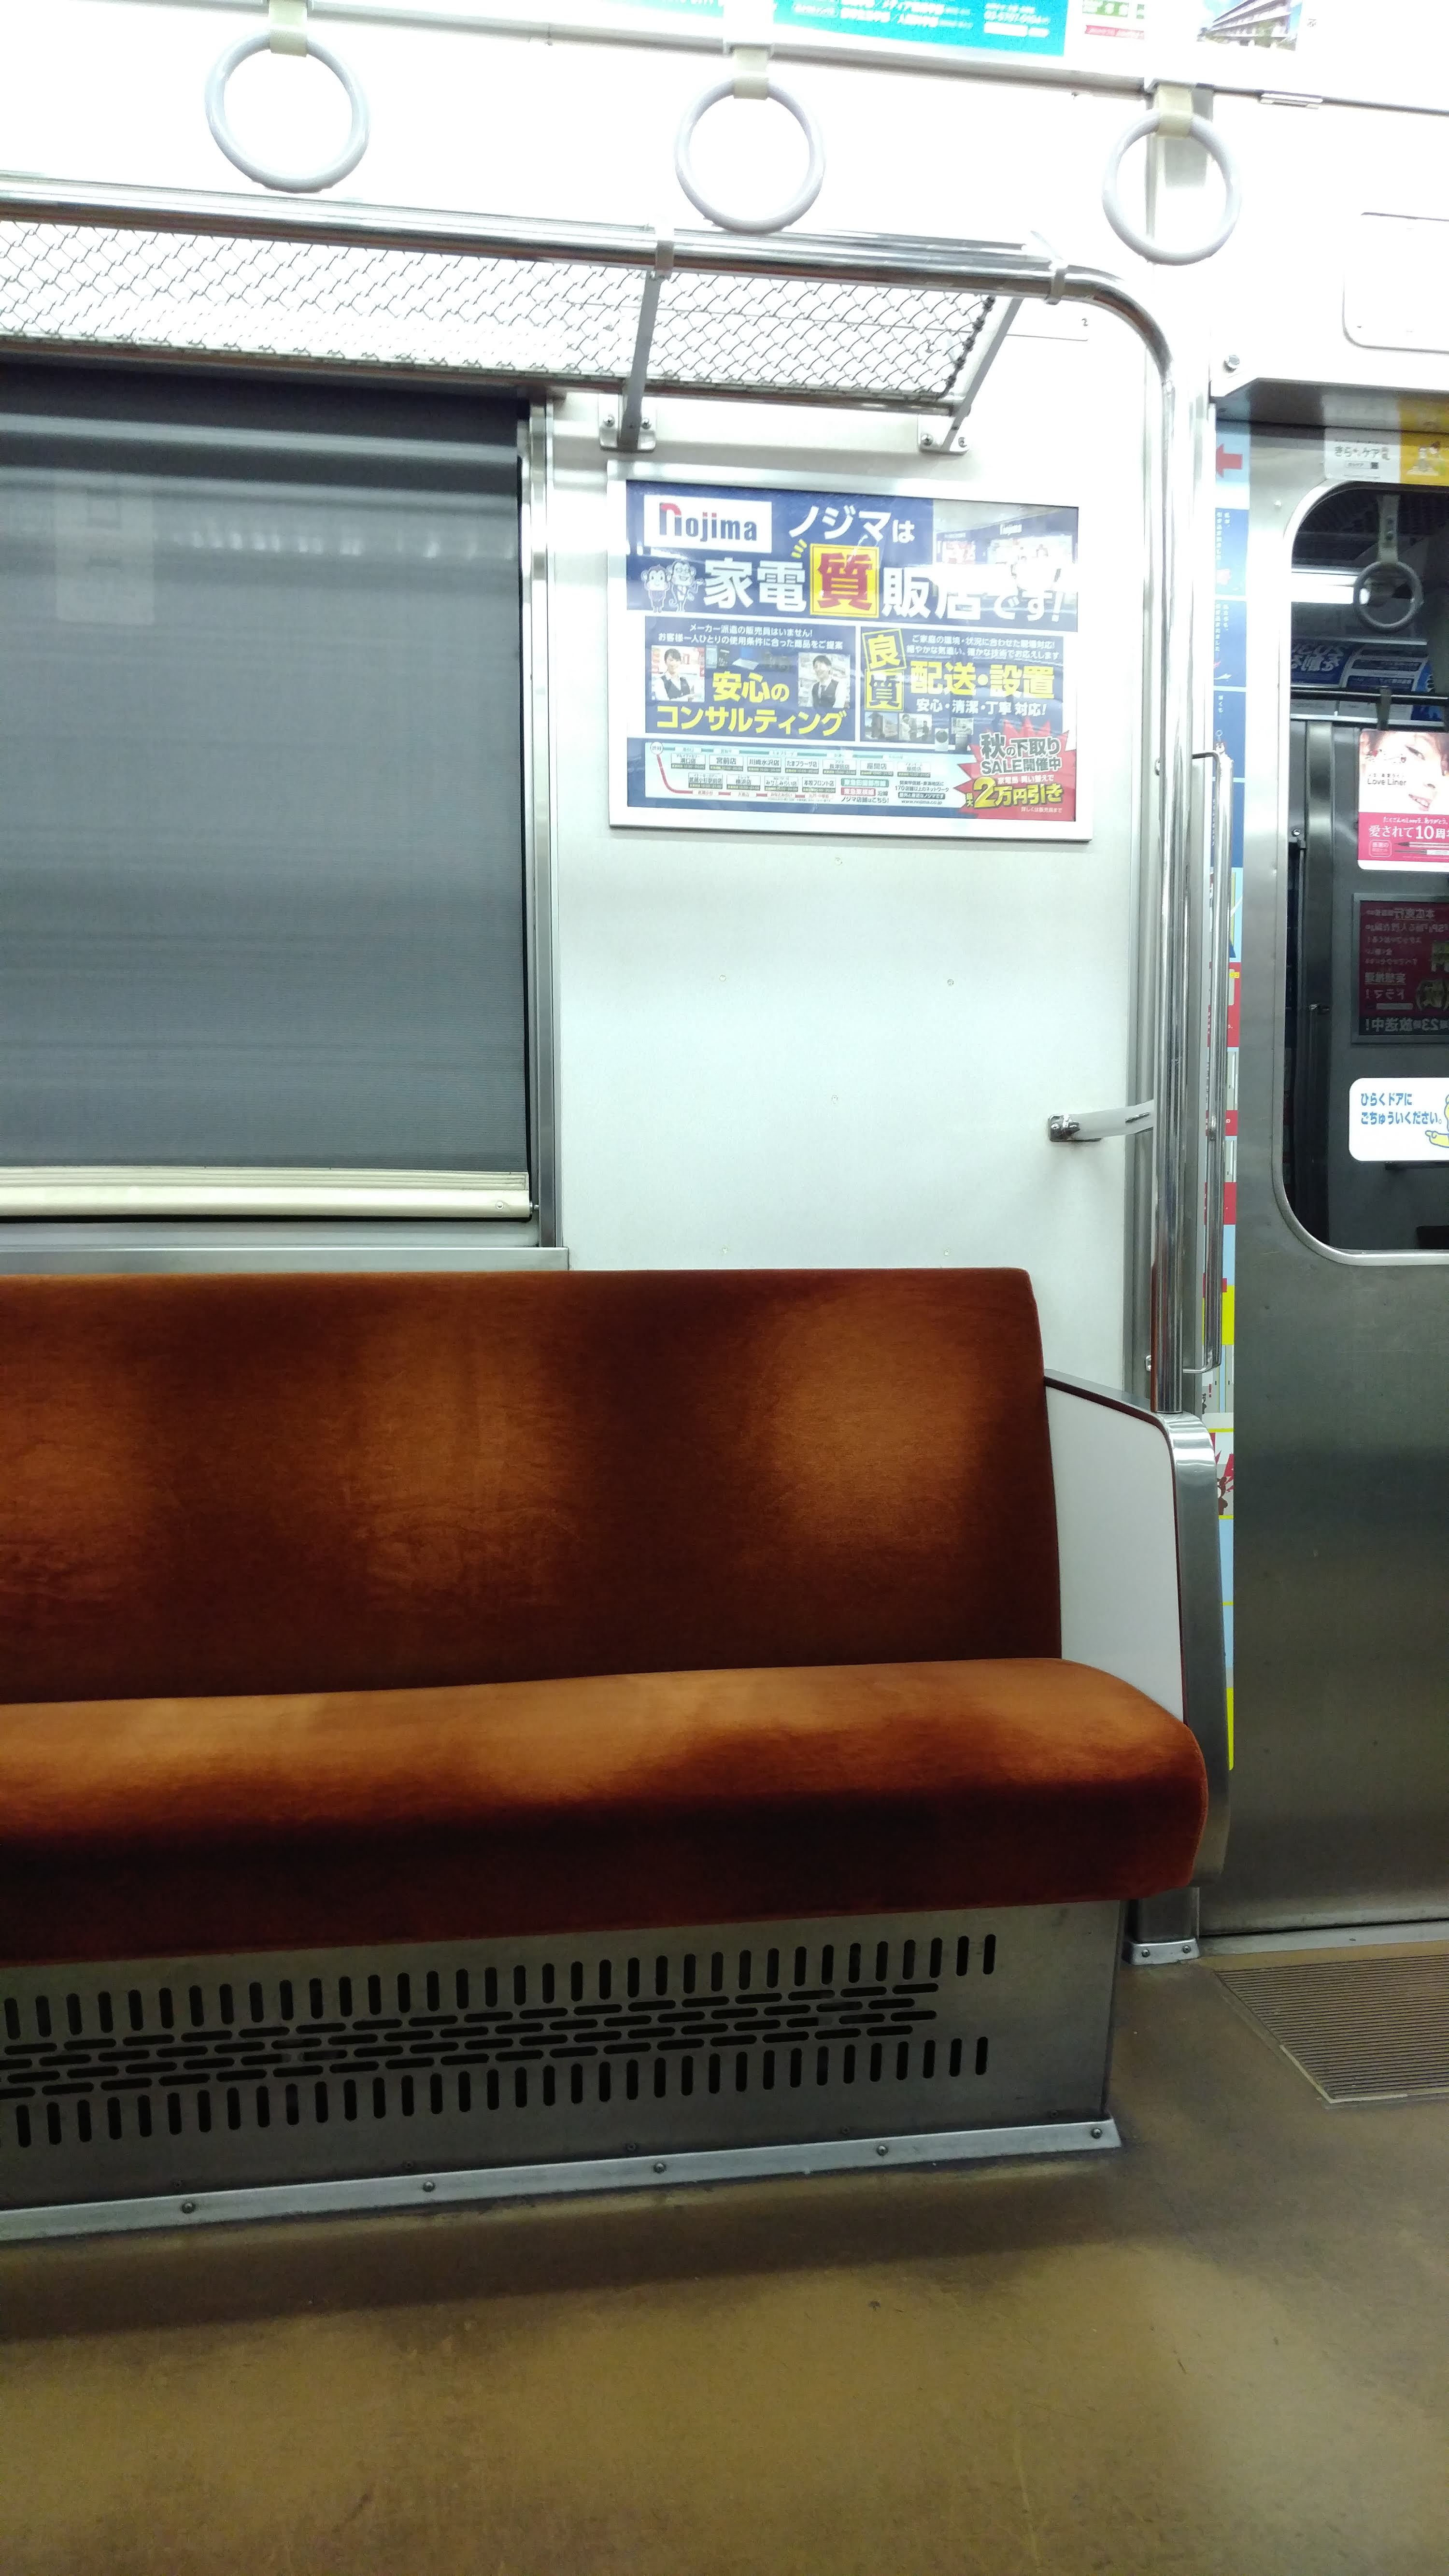 interior of an old subway car with amber cloth seating